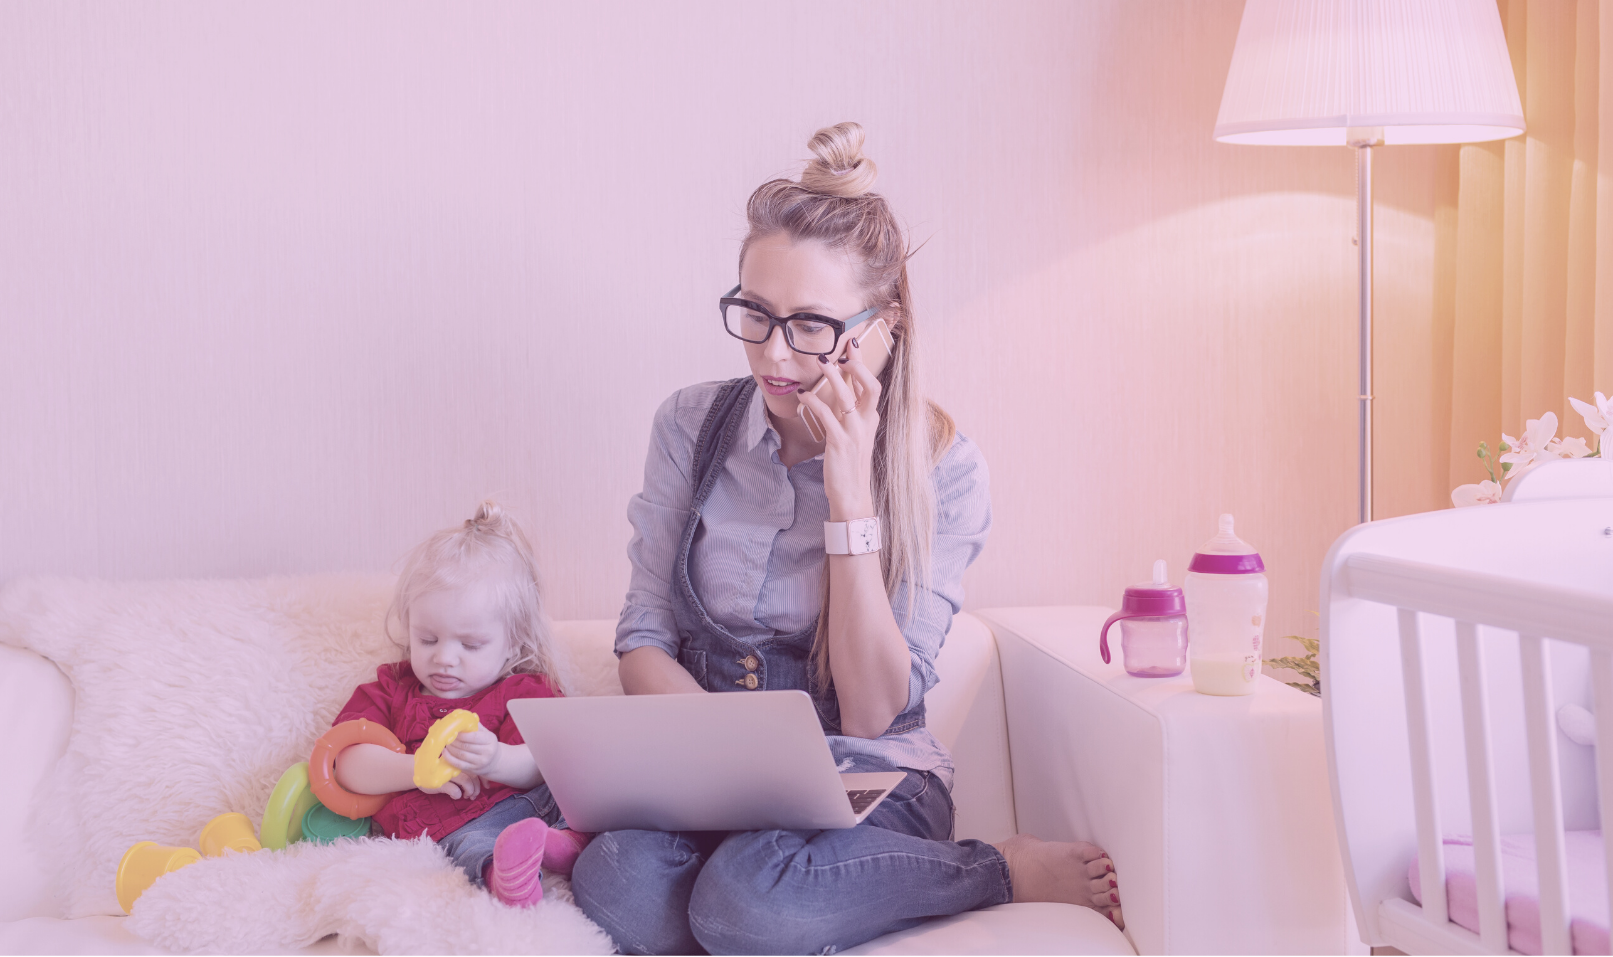 7 Helpful Steps To Calm The Fears of Stay-At-Home Moms Facing Divorce